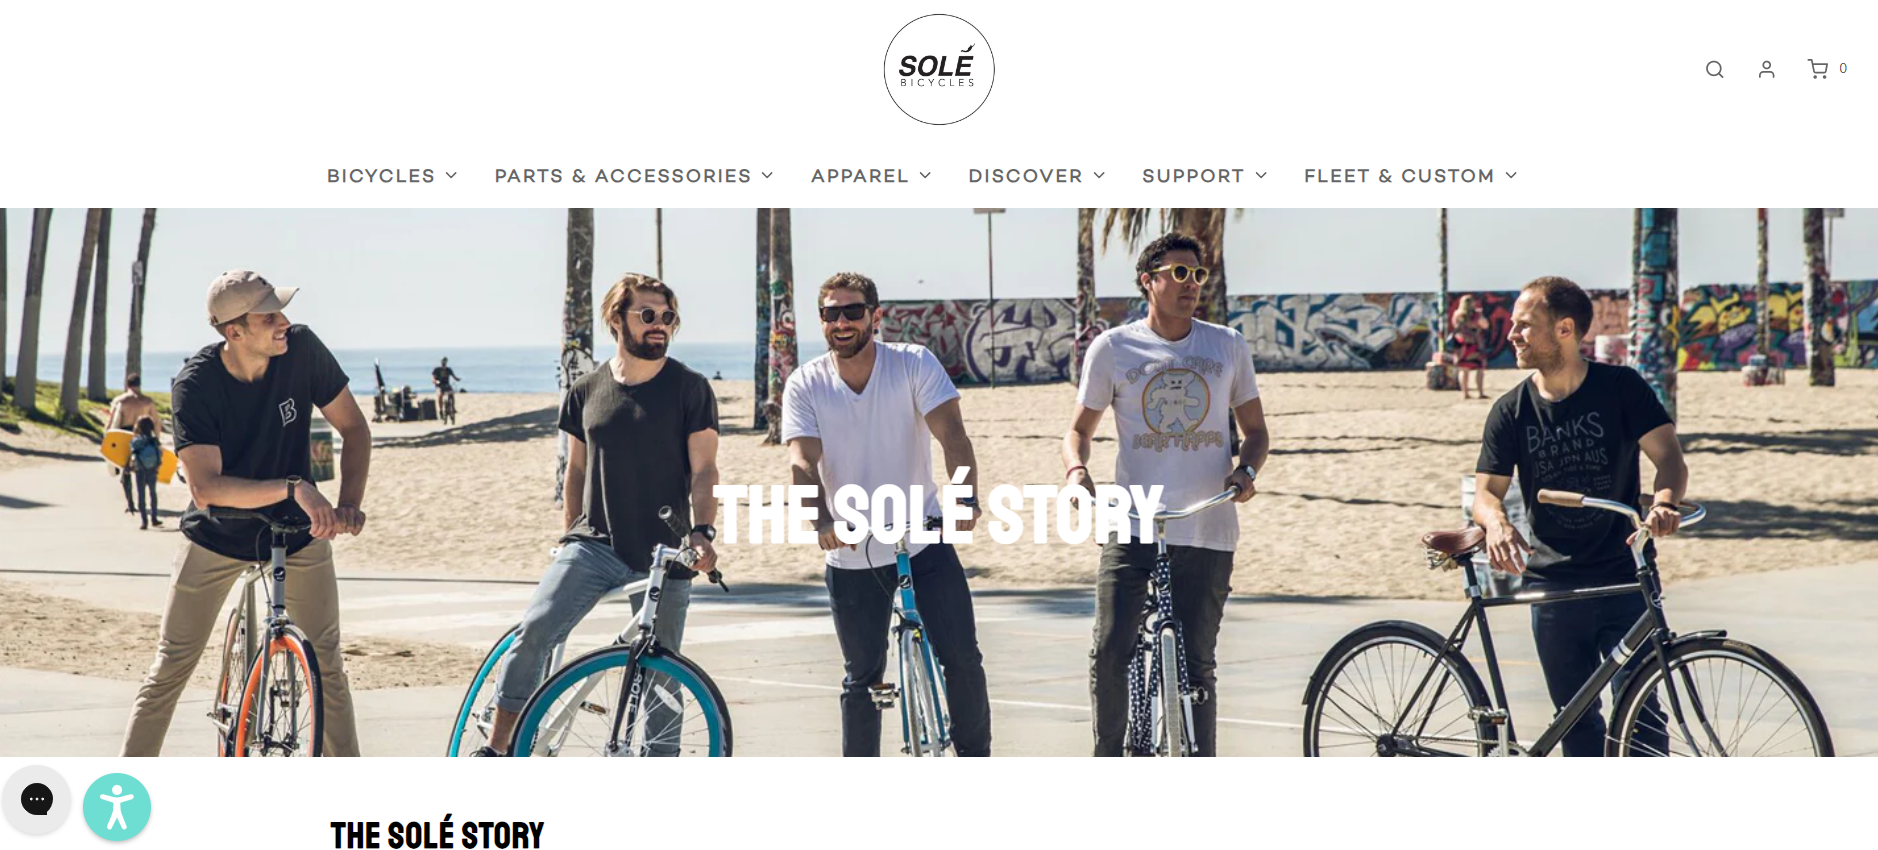 marque californienne Sole Bicycles